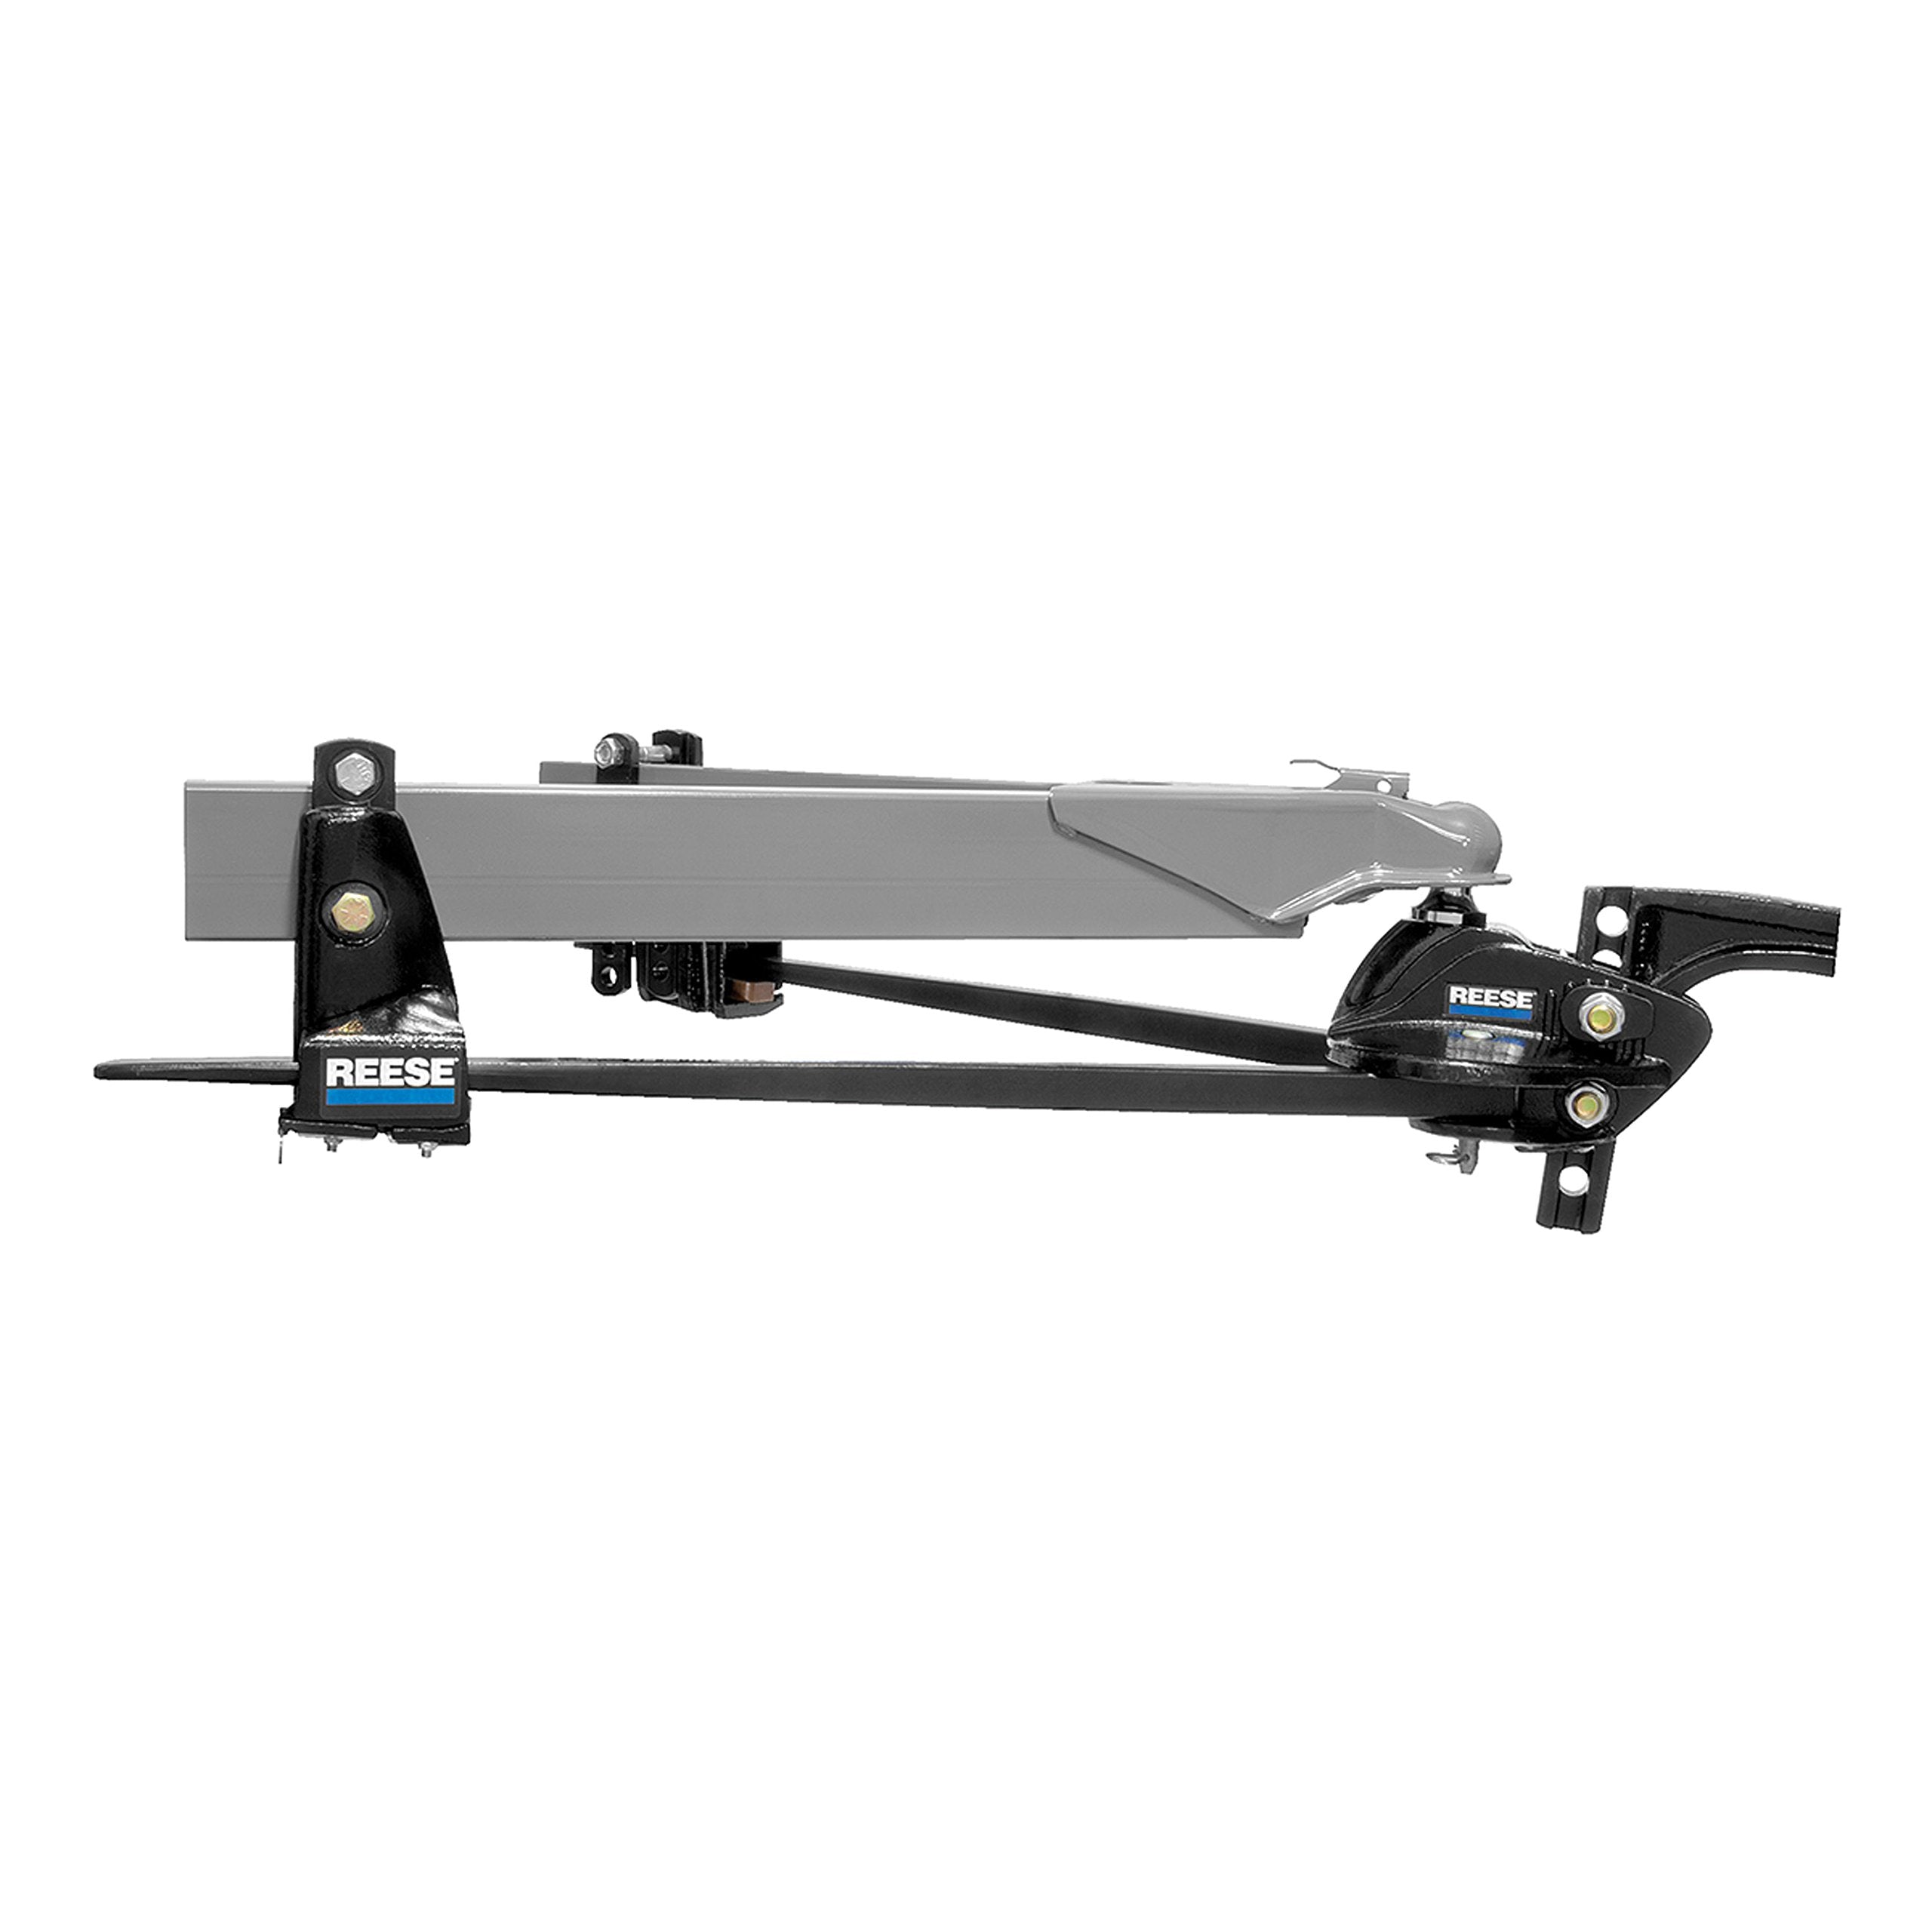 Reese 66560 Steadi-Flex Trunnion Weight-Distributing Hitch Kit with Shank - 12,000 lb.